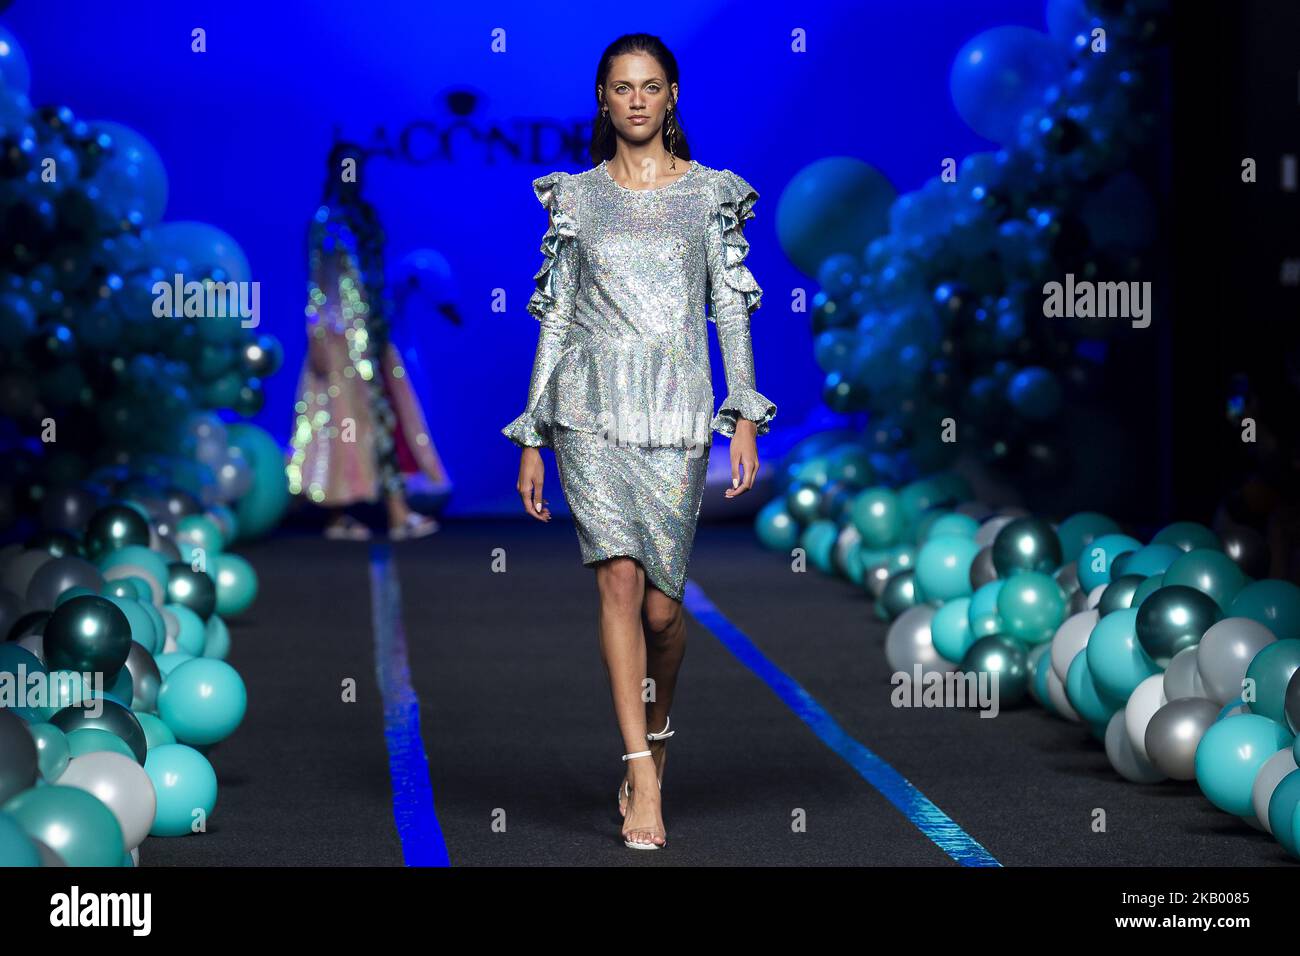 A model walks the runway at the 'La Condesa' catwalk during the Mercedes-Benz Madrid Fashion Week Spring/Summer in Madrid, Spain. July 11, 2018. (Photo by Peter Sabok/NurPhoto) Stock Photo